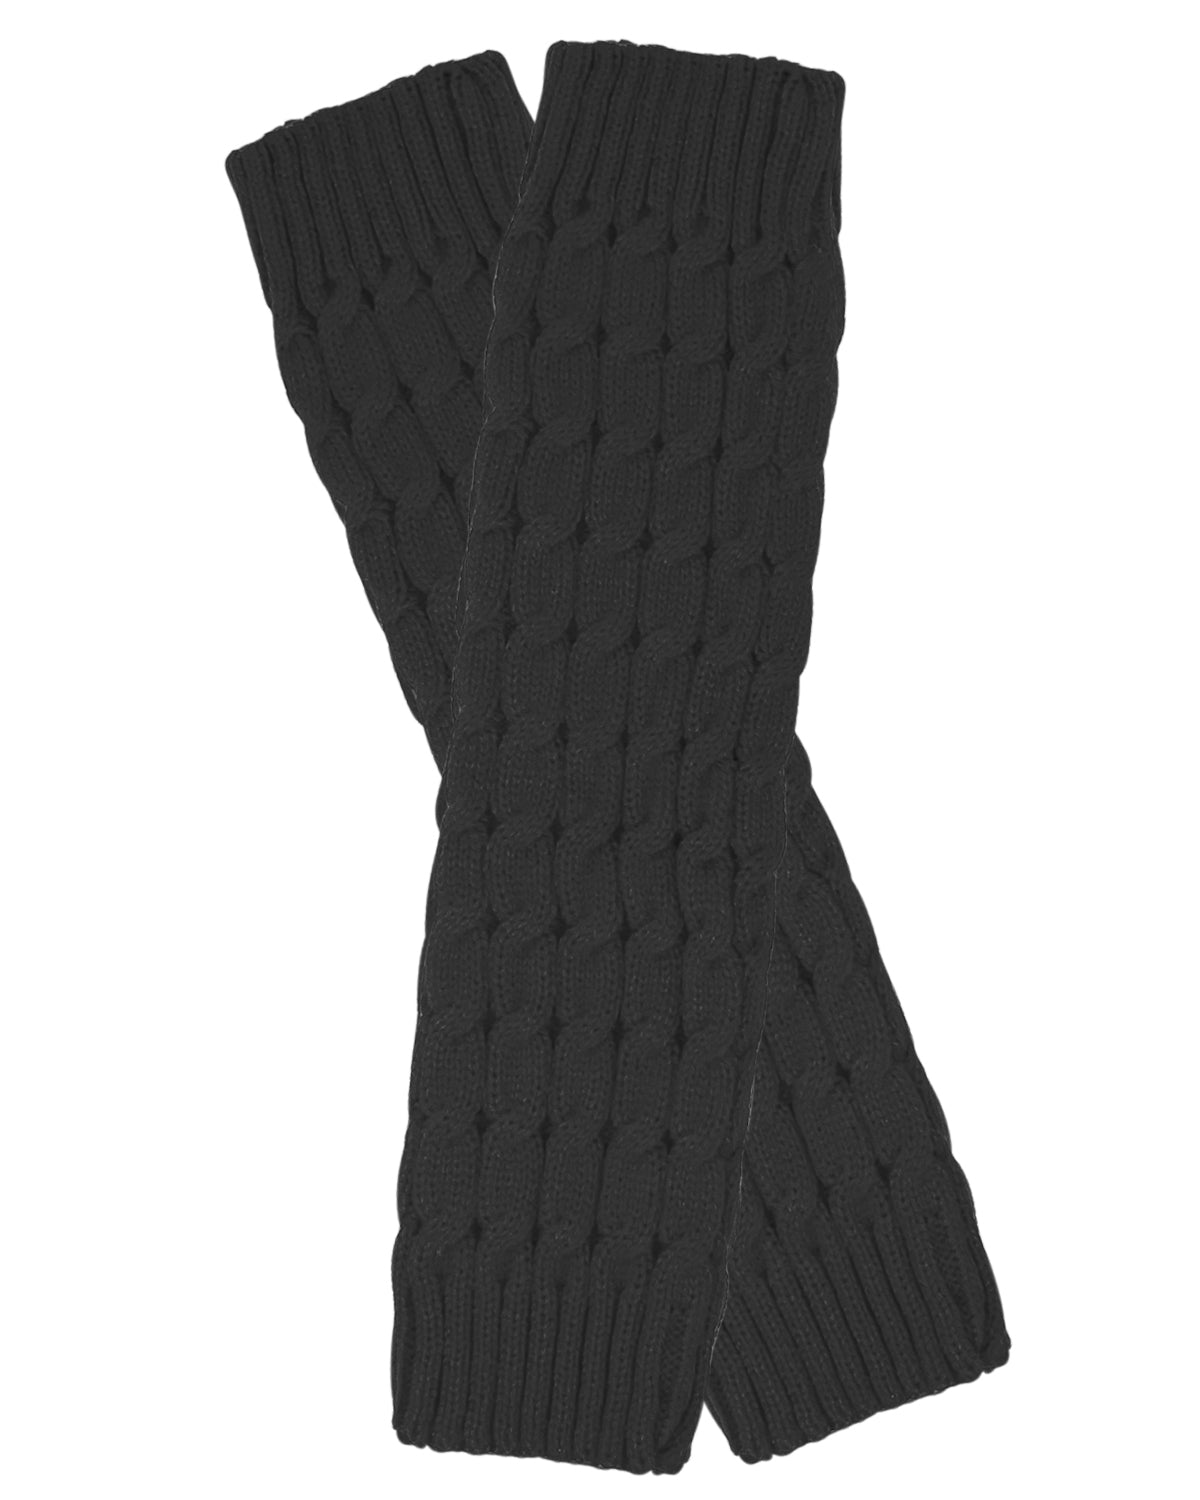 Wrapables Women's Cable Knit Leg Warmers